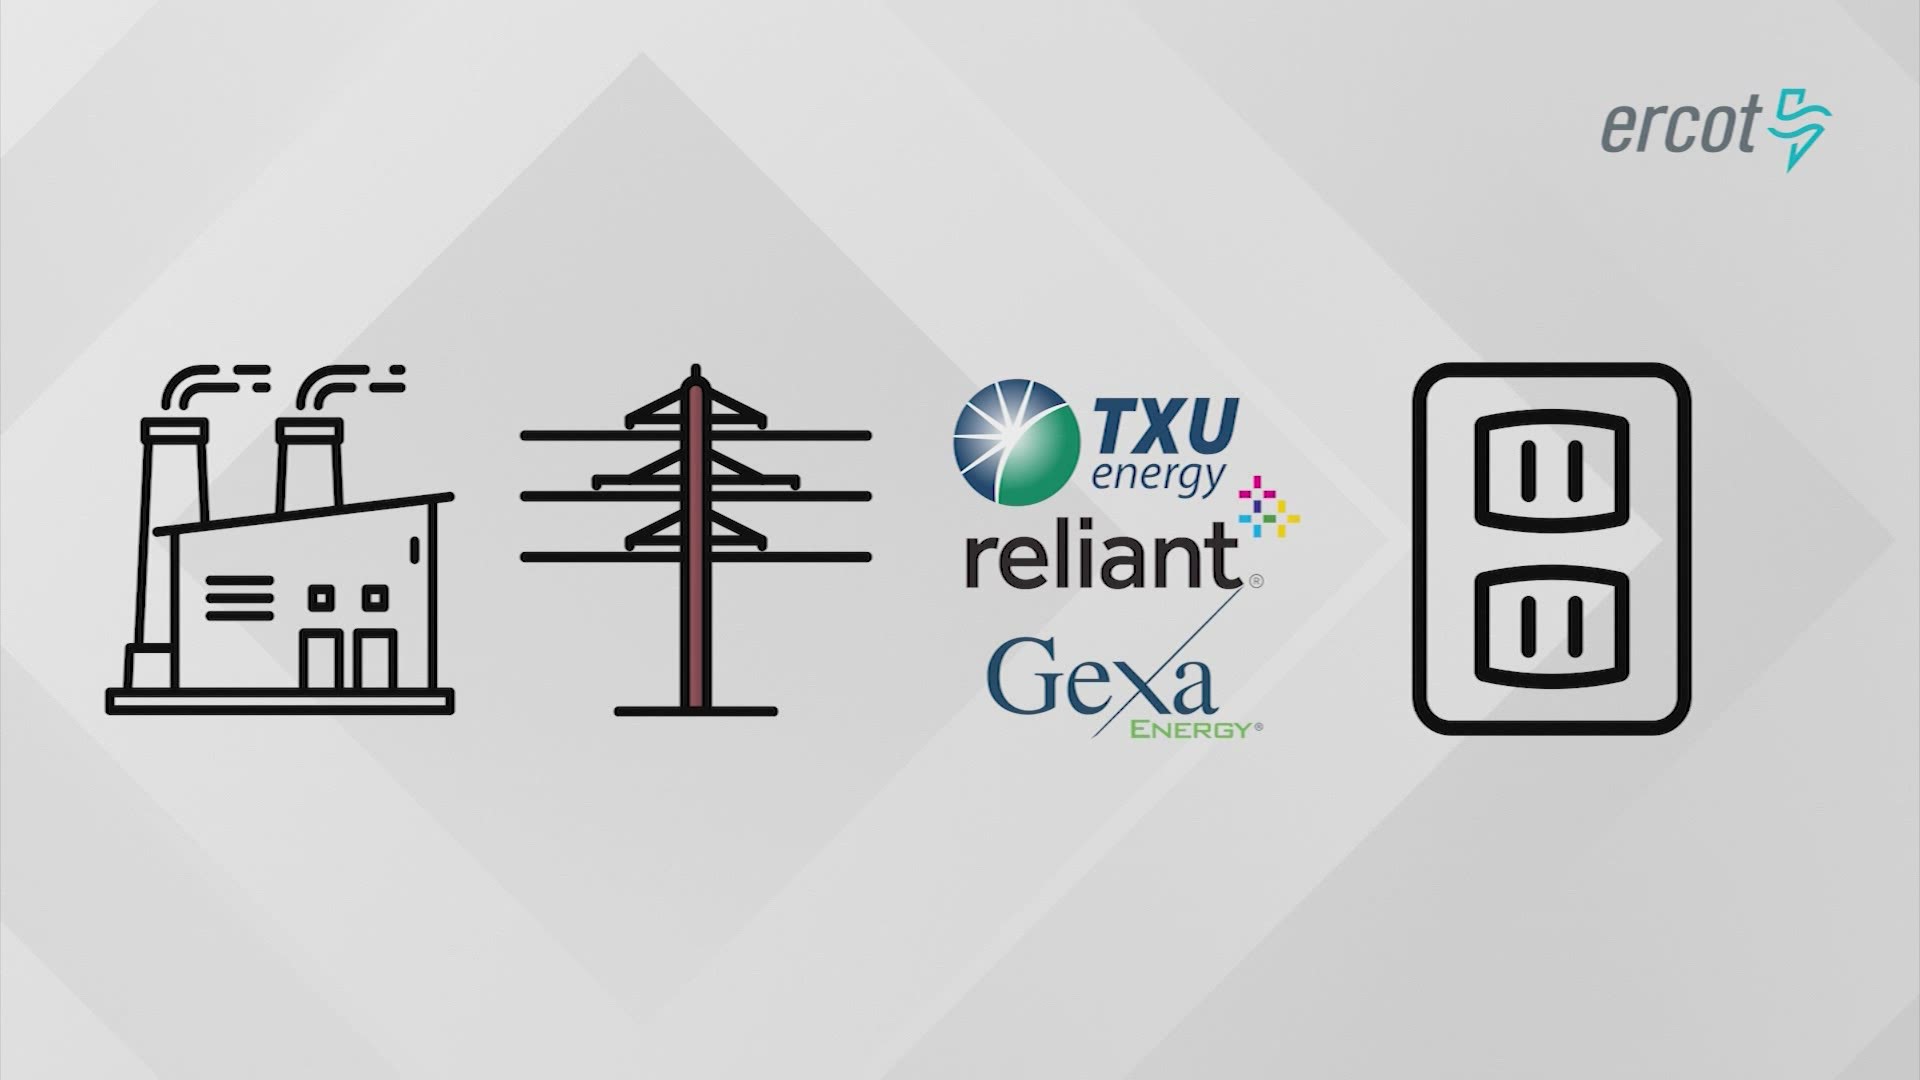 ERCOT, rolling blackouts, power outages: what does it all mean? We explain why millions of Texans are without power and who is responsible.